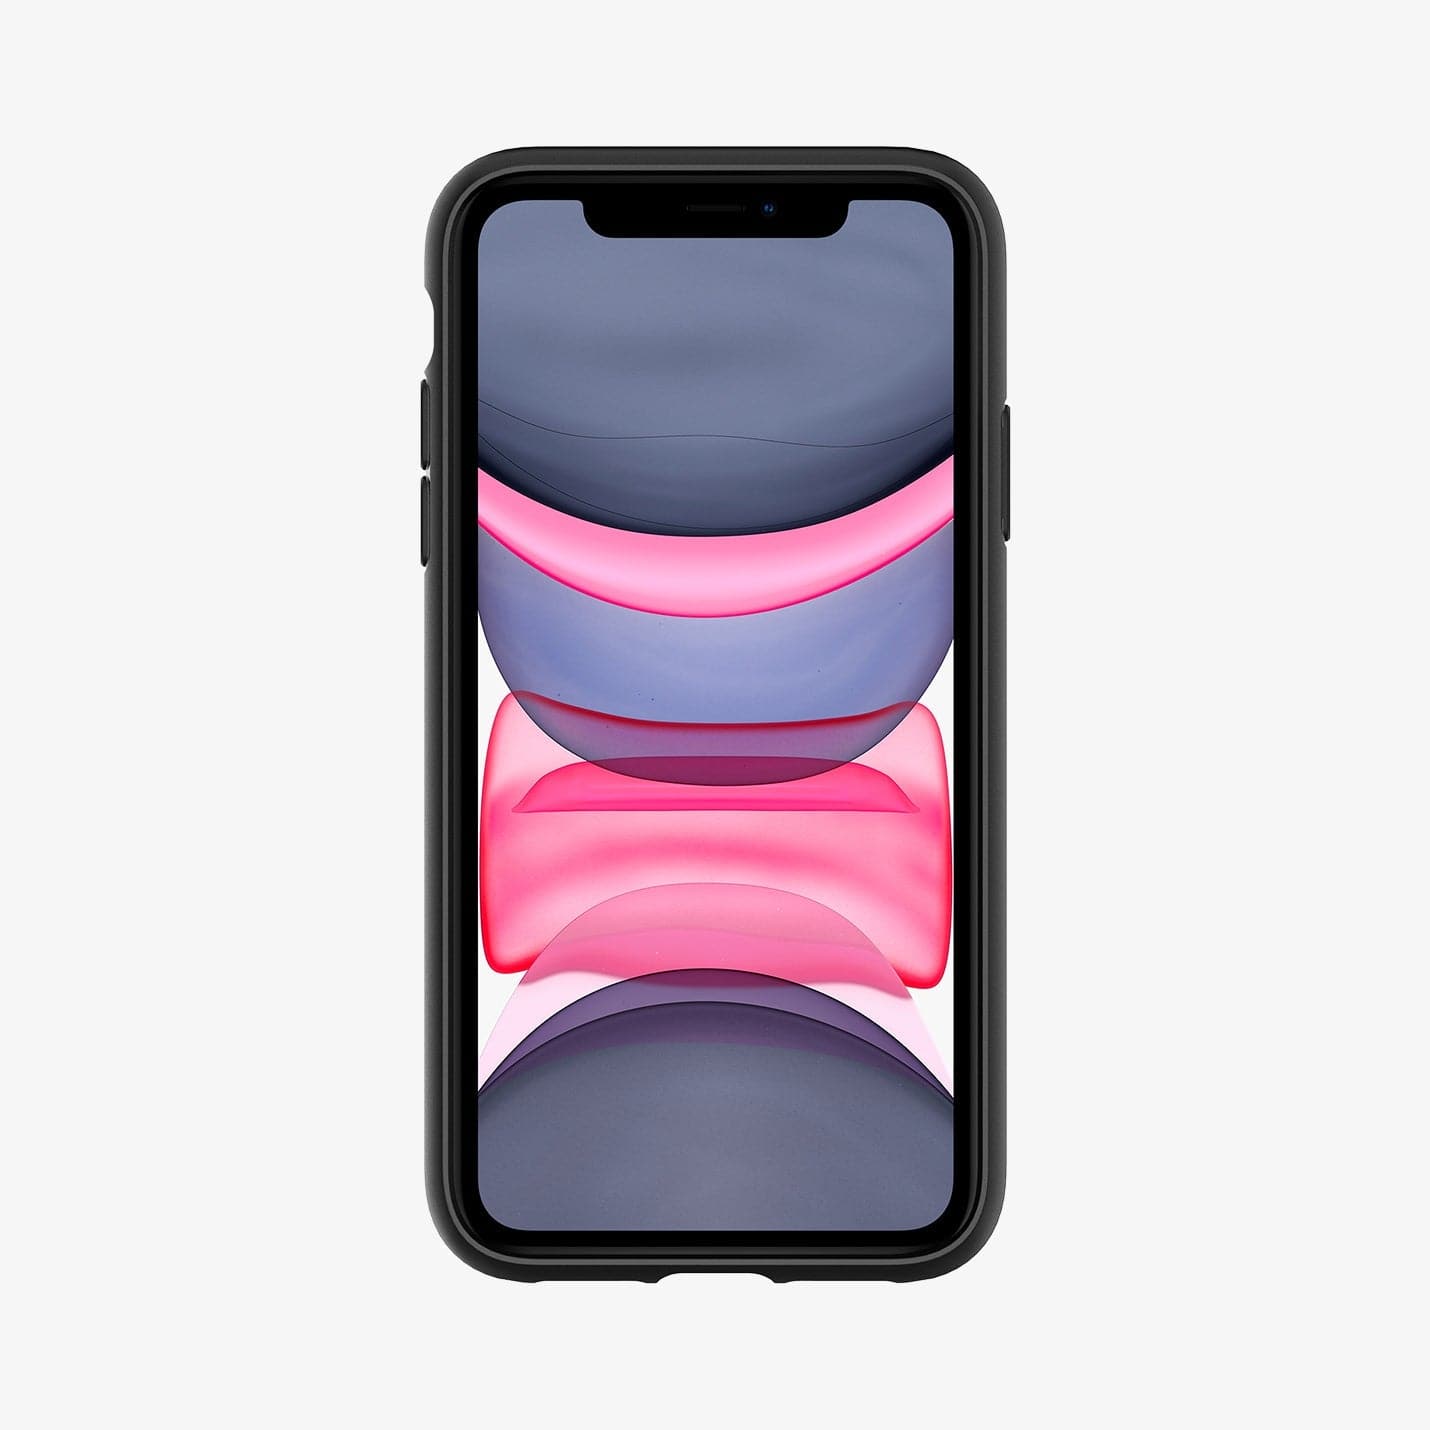 ACS02041 - iPhone 11 Case Thin Fit Pro in black showing the front